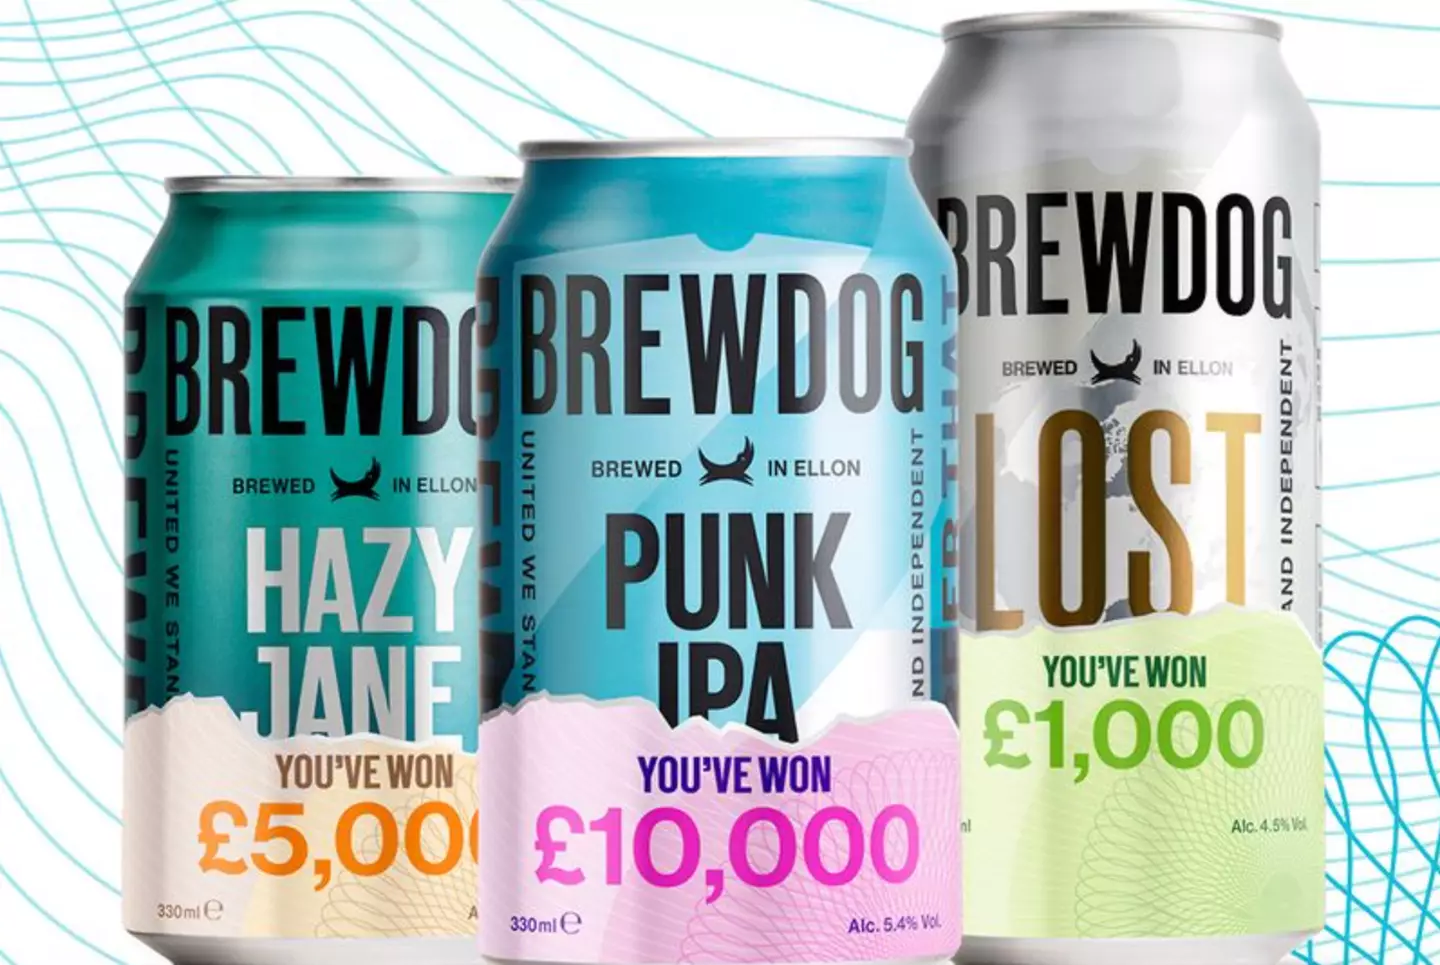 Craft beer company BrewDog has hidden wads of cash within its multipack cans as part of its 'Cash Cans' competition.